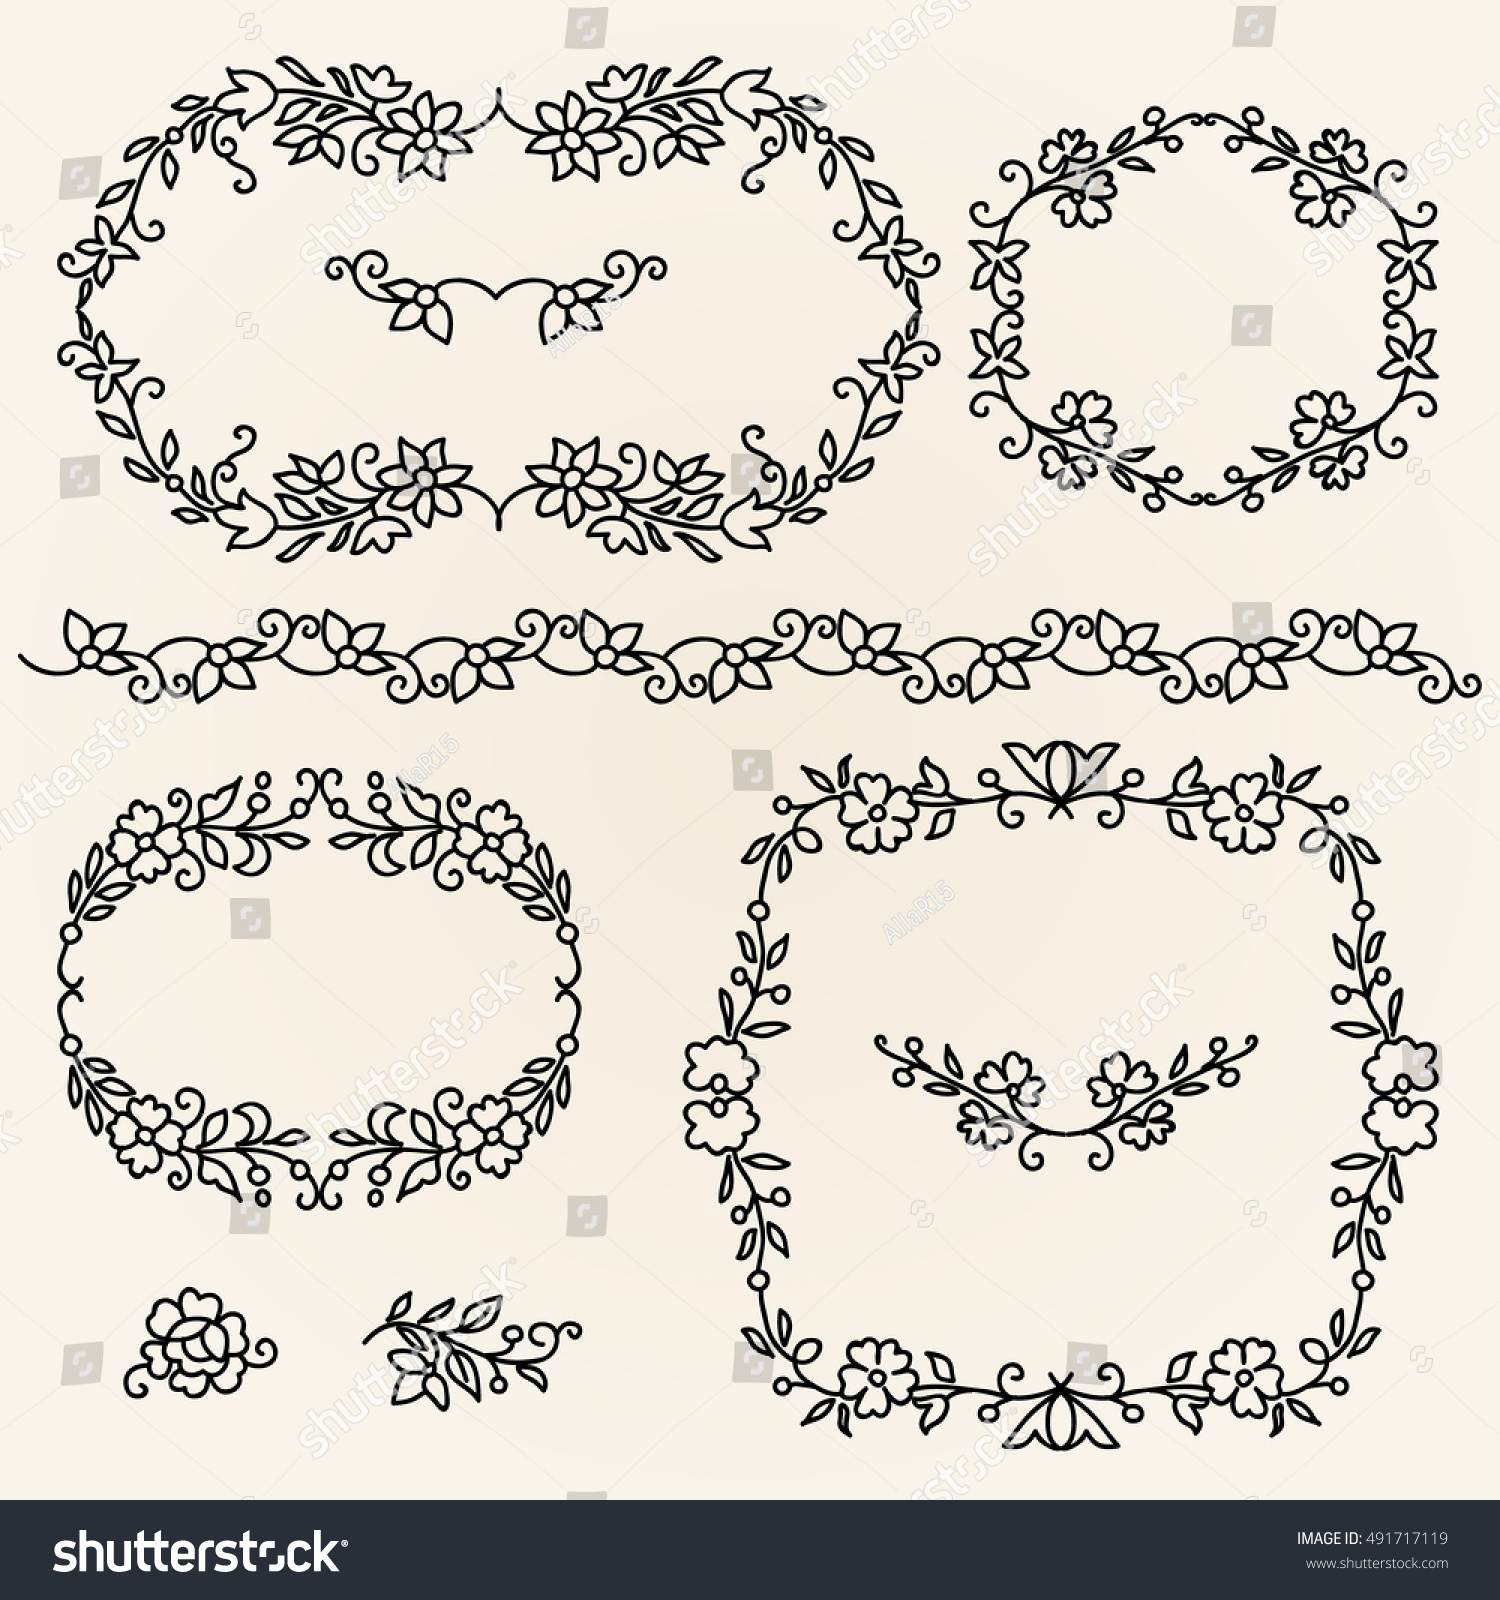 Set Hand Drawn Wreaths Romantic Floral Stock Vector Royalty Free 491717119 Shutterstock 1105